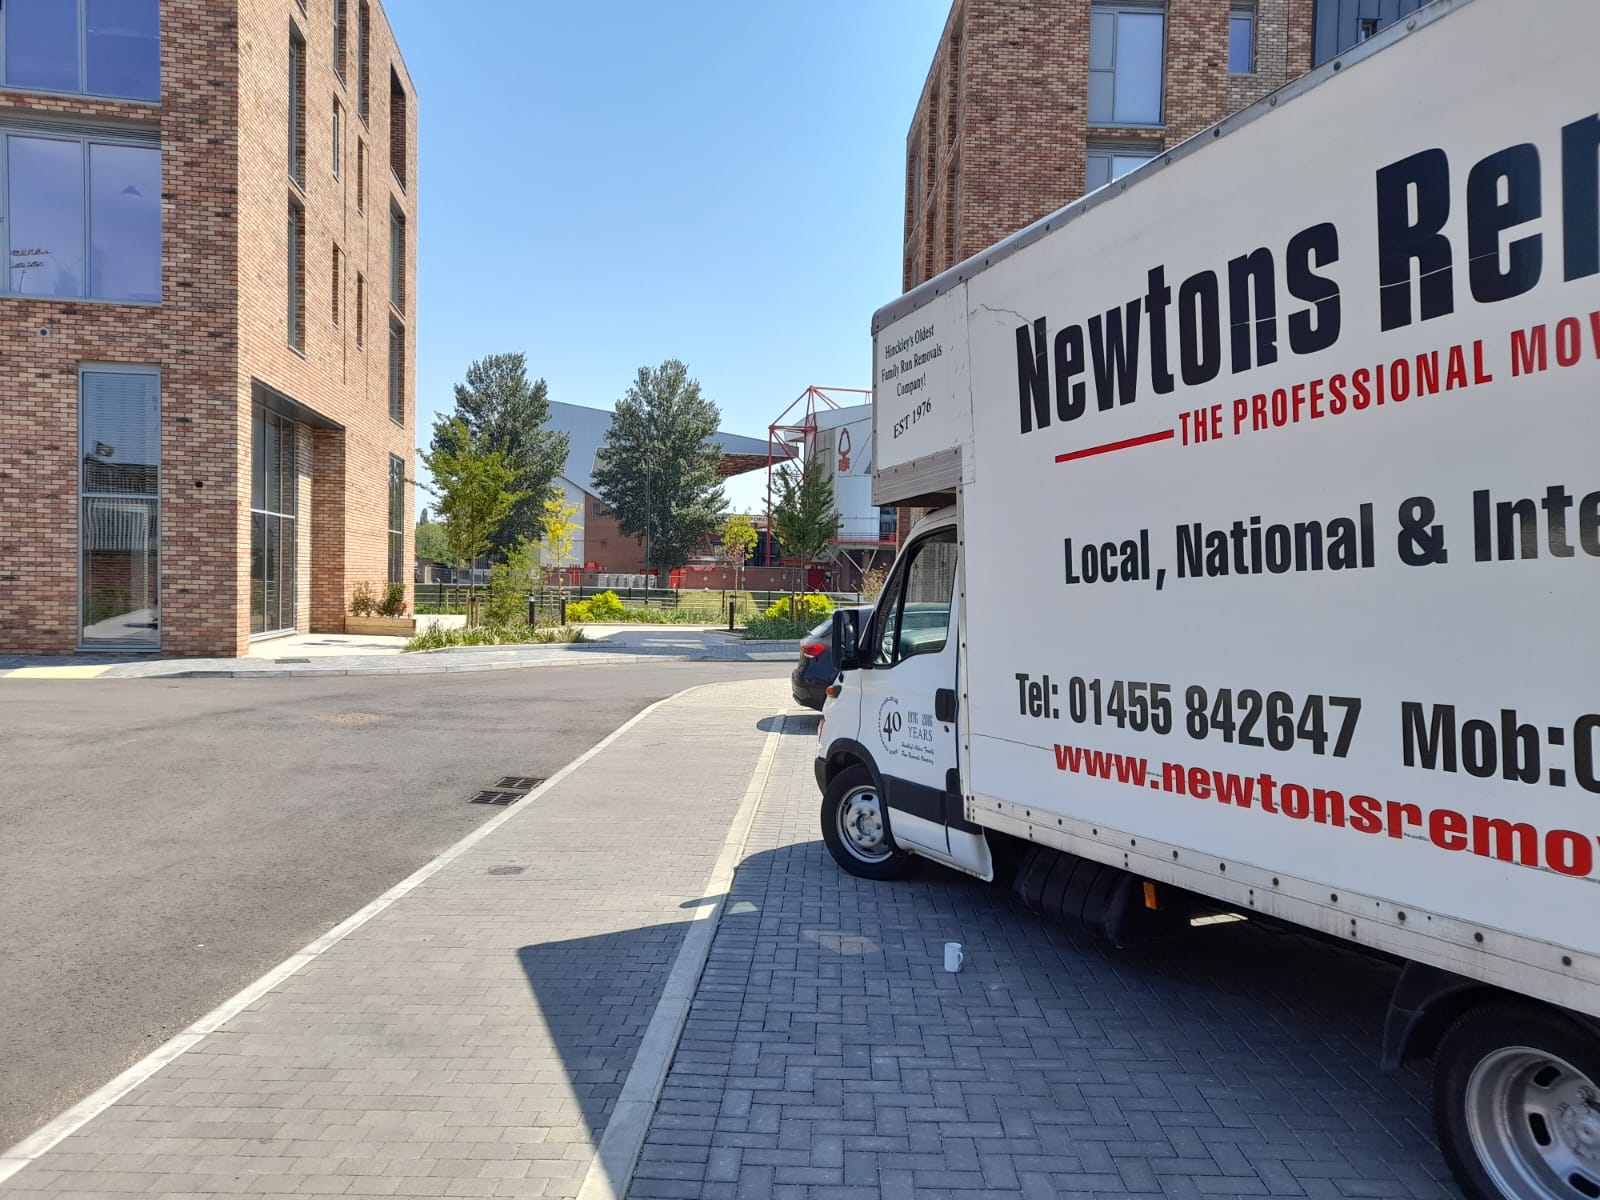 Removals Company In Hinckley, Nuneaton, Bedworth, Coventry